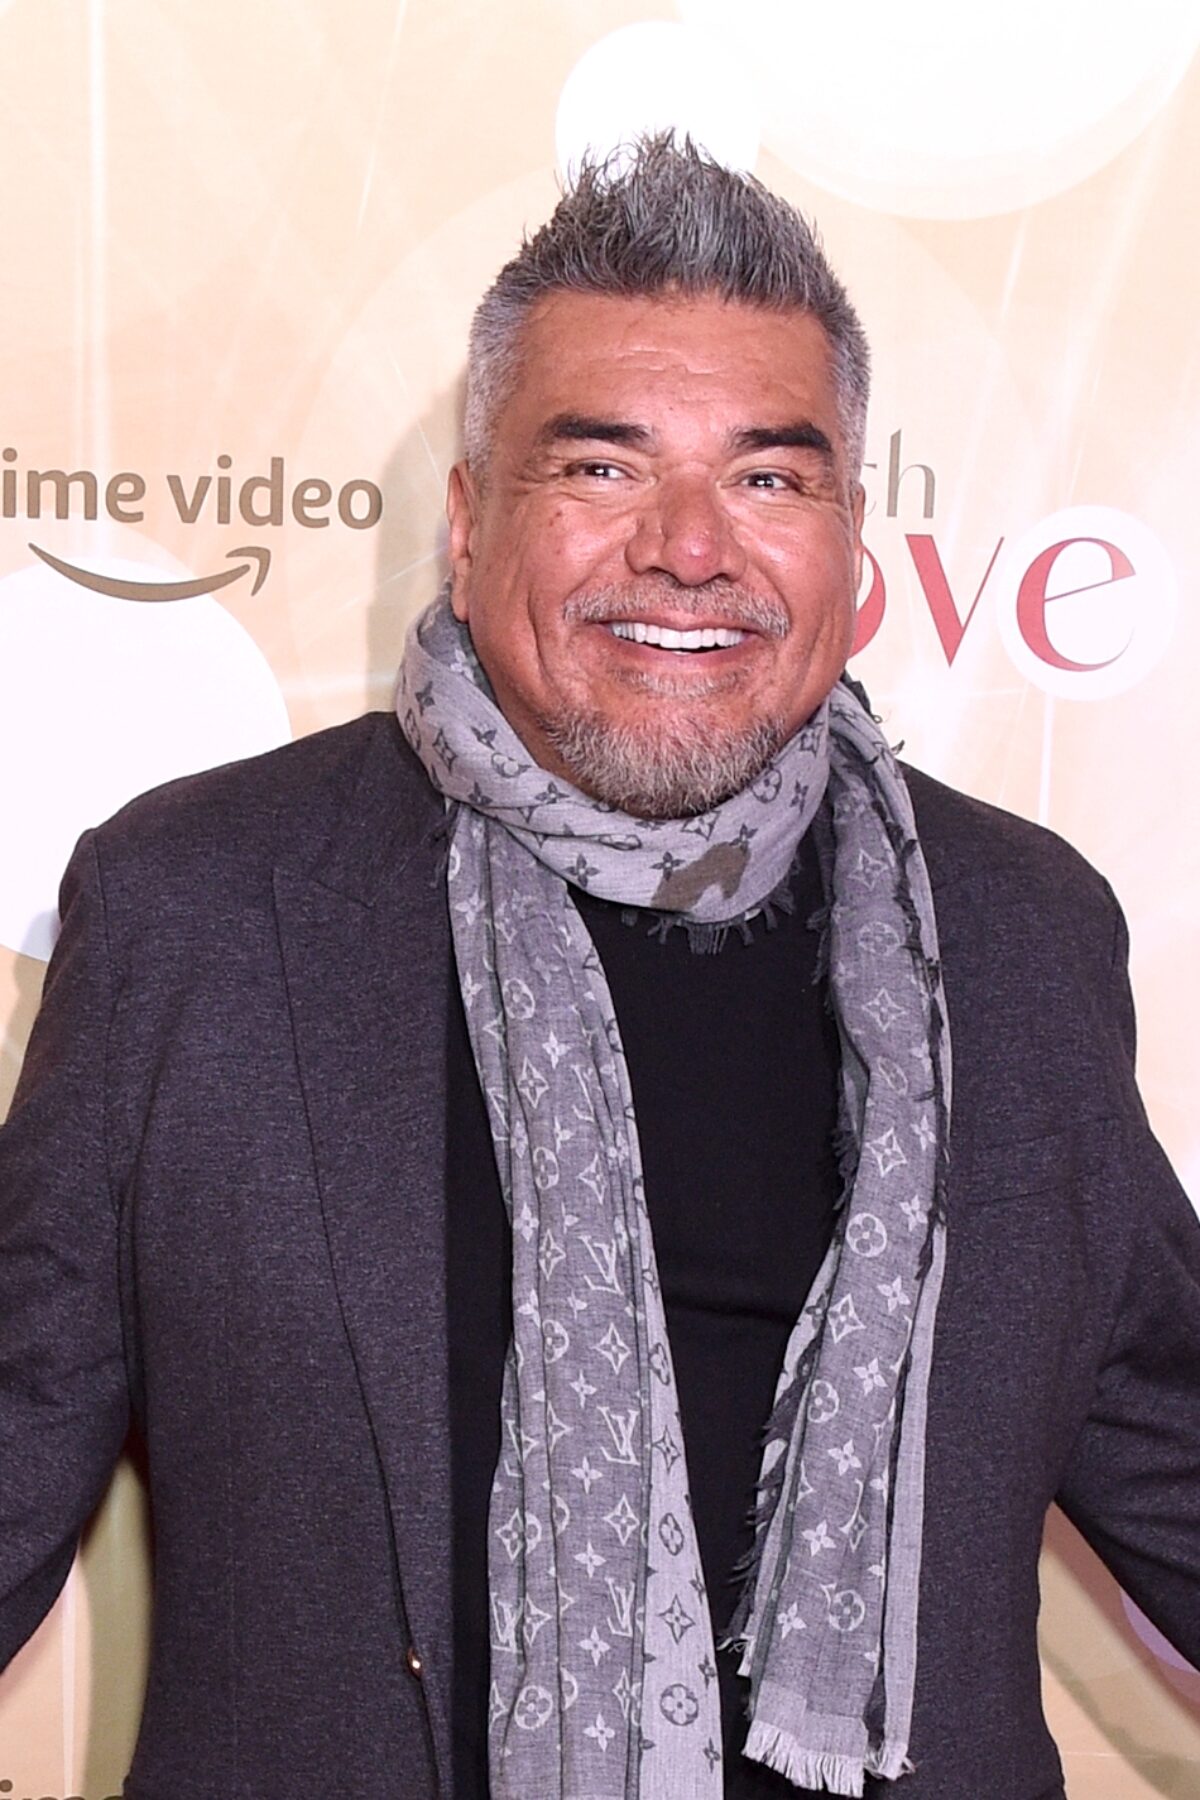 HOLLYWOOD, CALIFORNIA - DECEMBER 09: George Lopez attends the season premiere of Amazon Prime's 